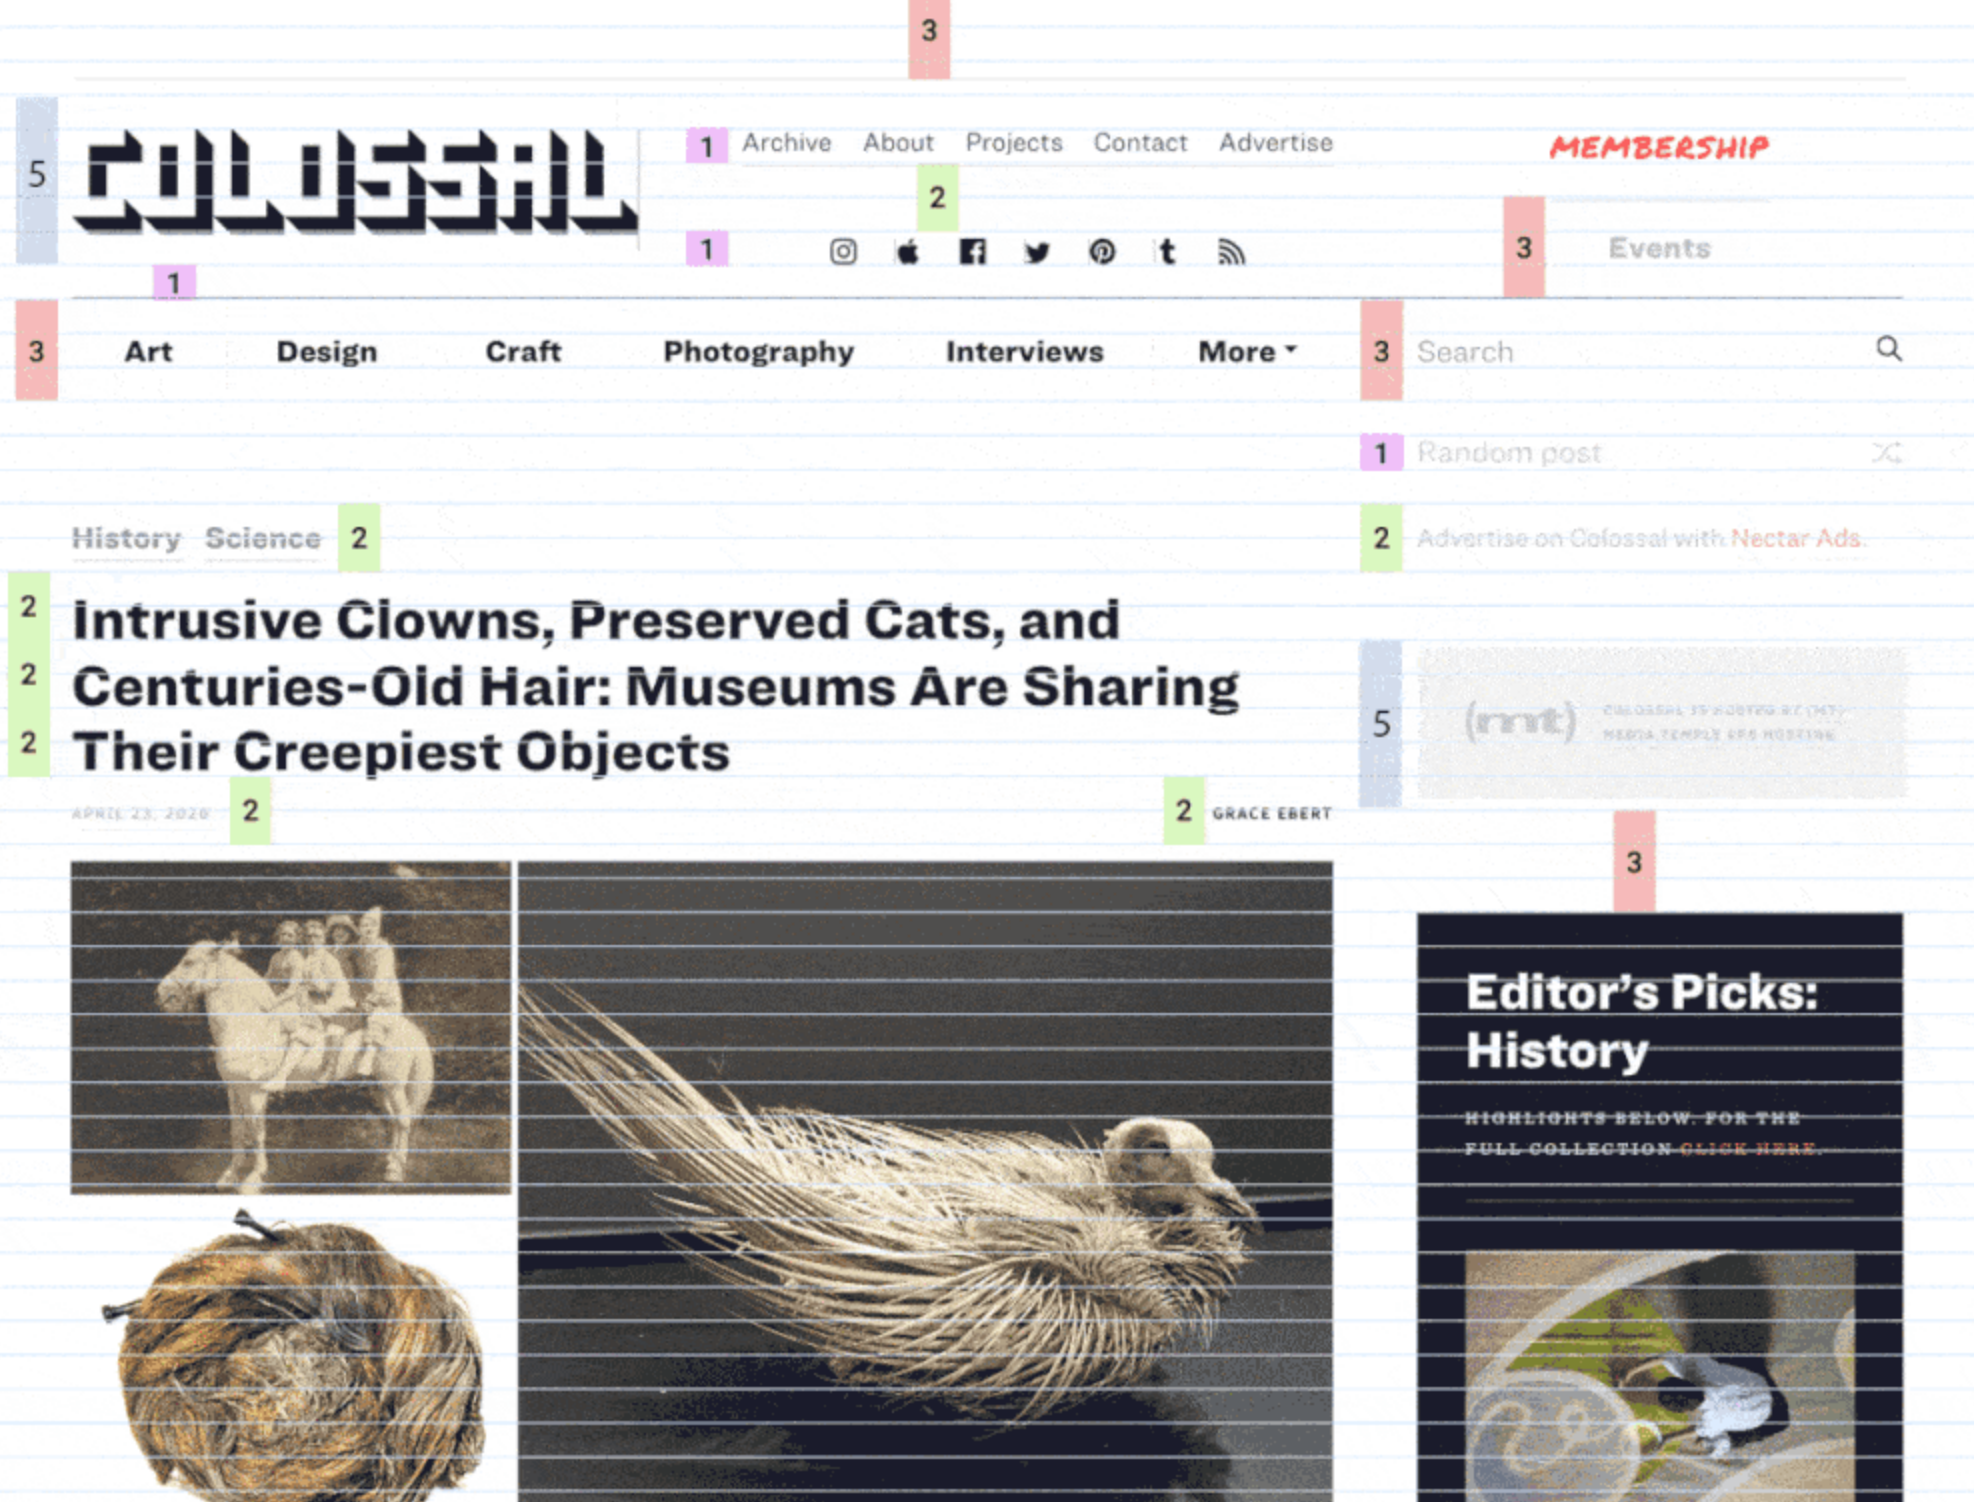 Colossal magazine uses a loose 21-pixel grid (specifically on desktop screens)